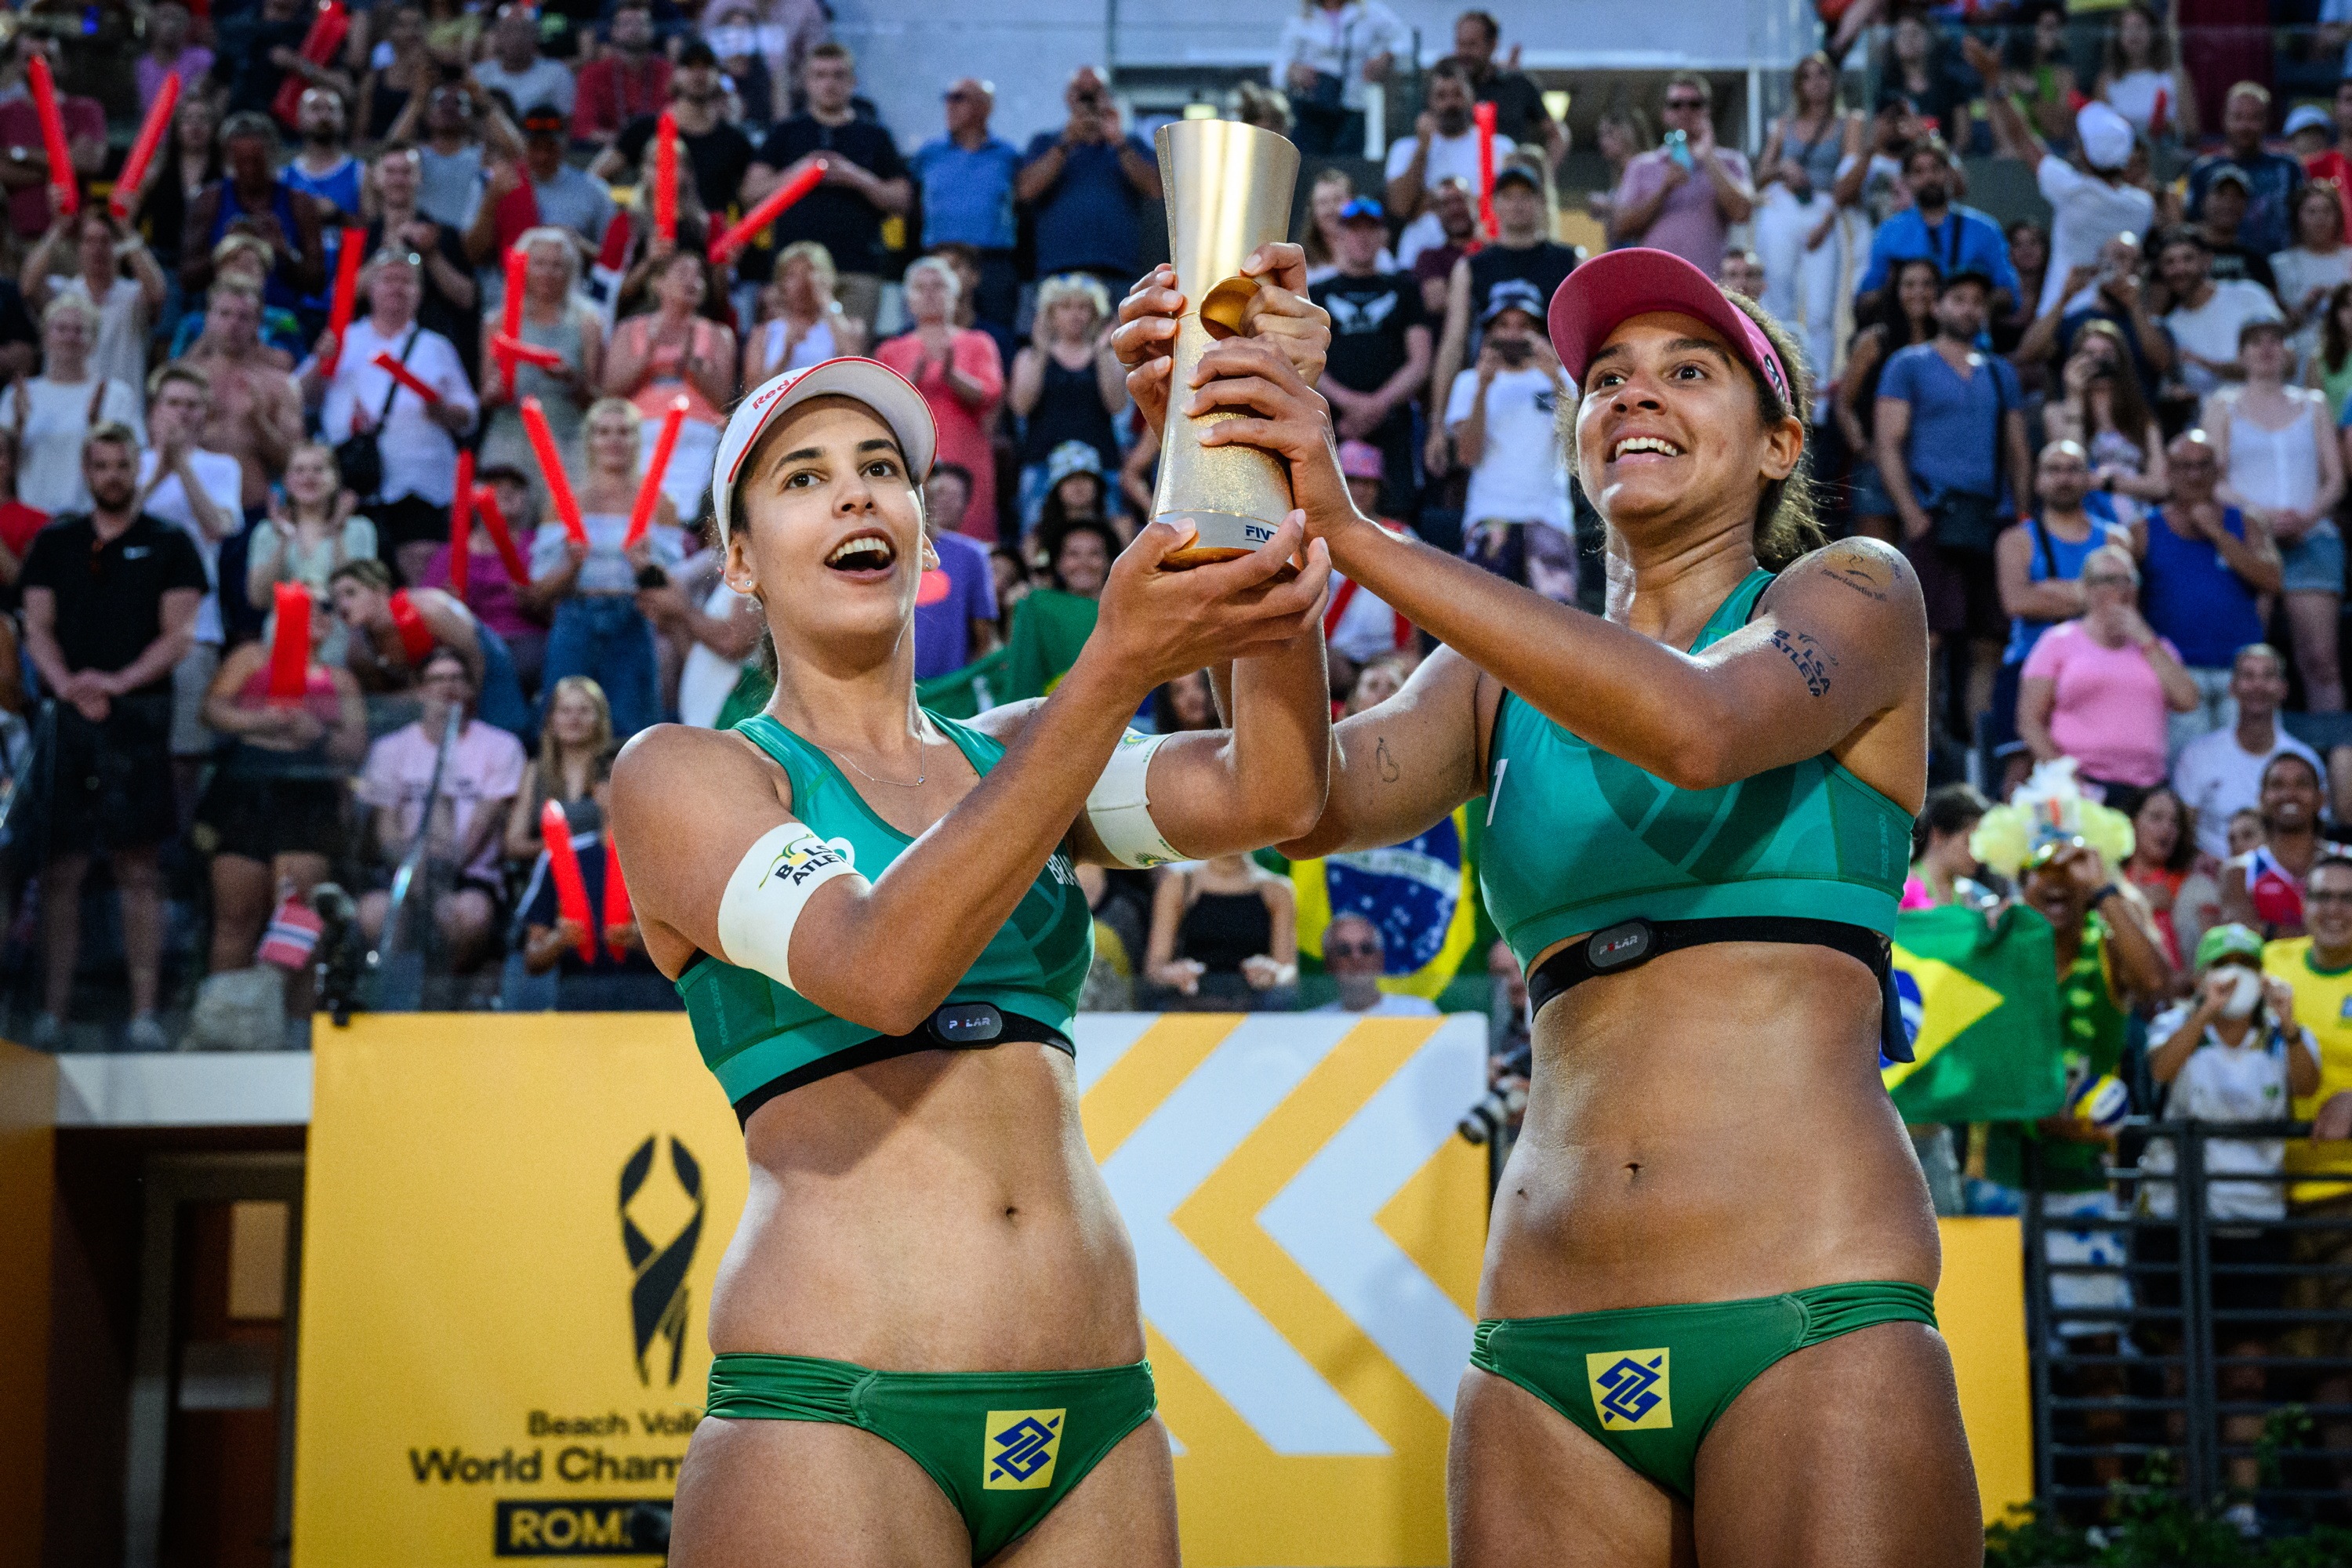 Ana Patrícia and Duda retake successful partnership in beach volleyball and  already have good results